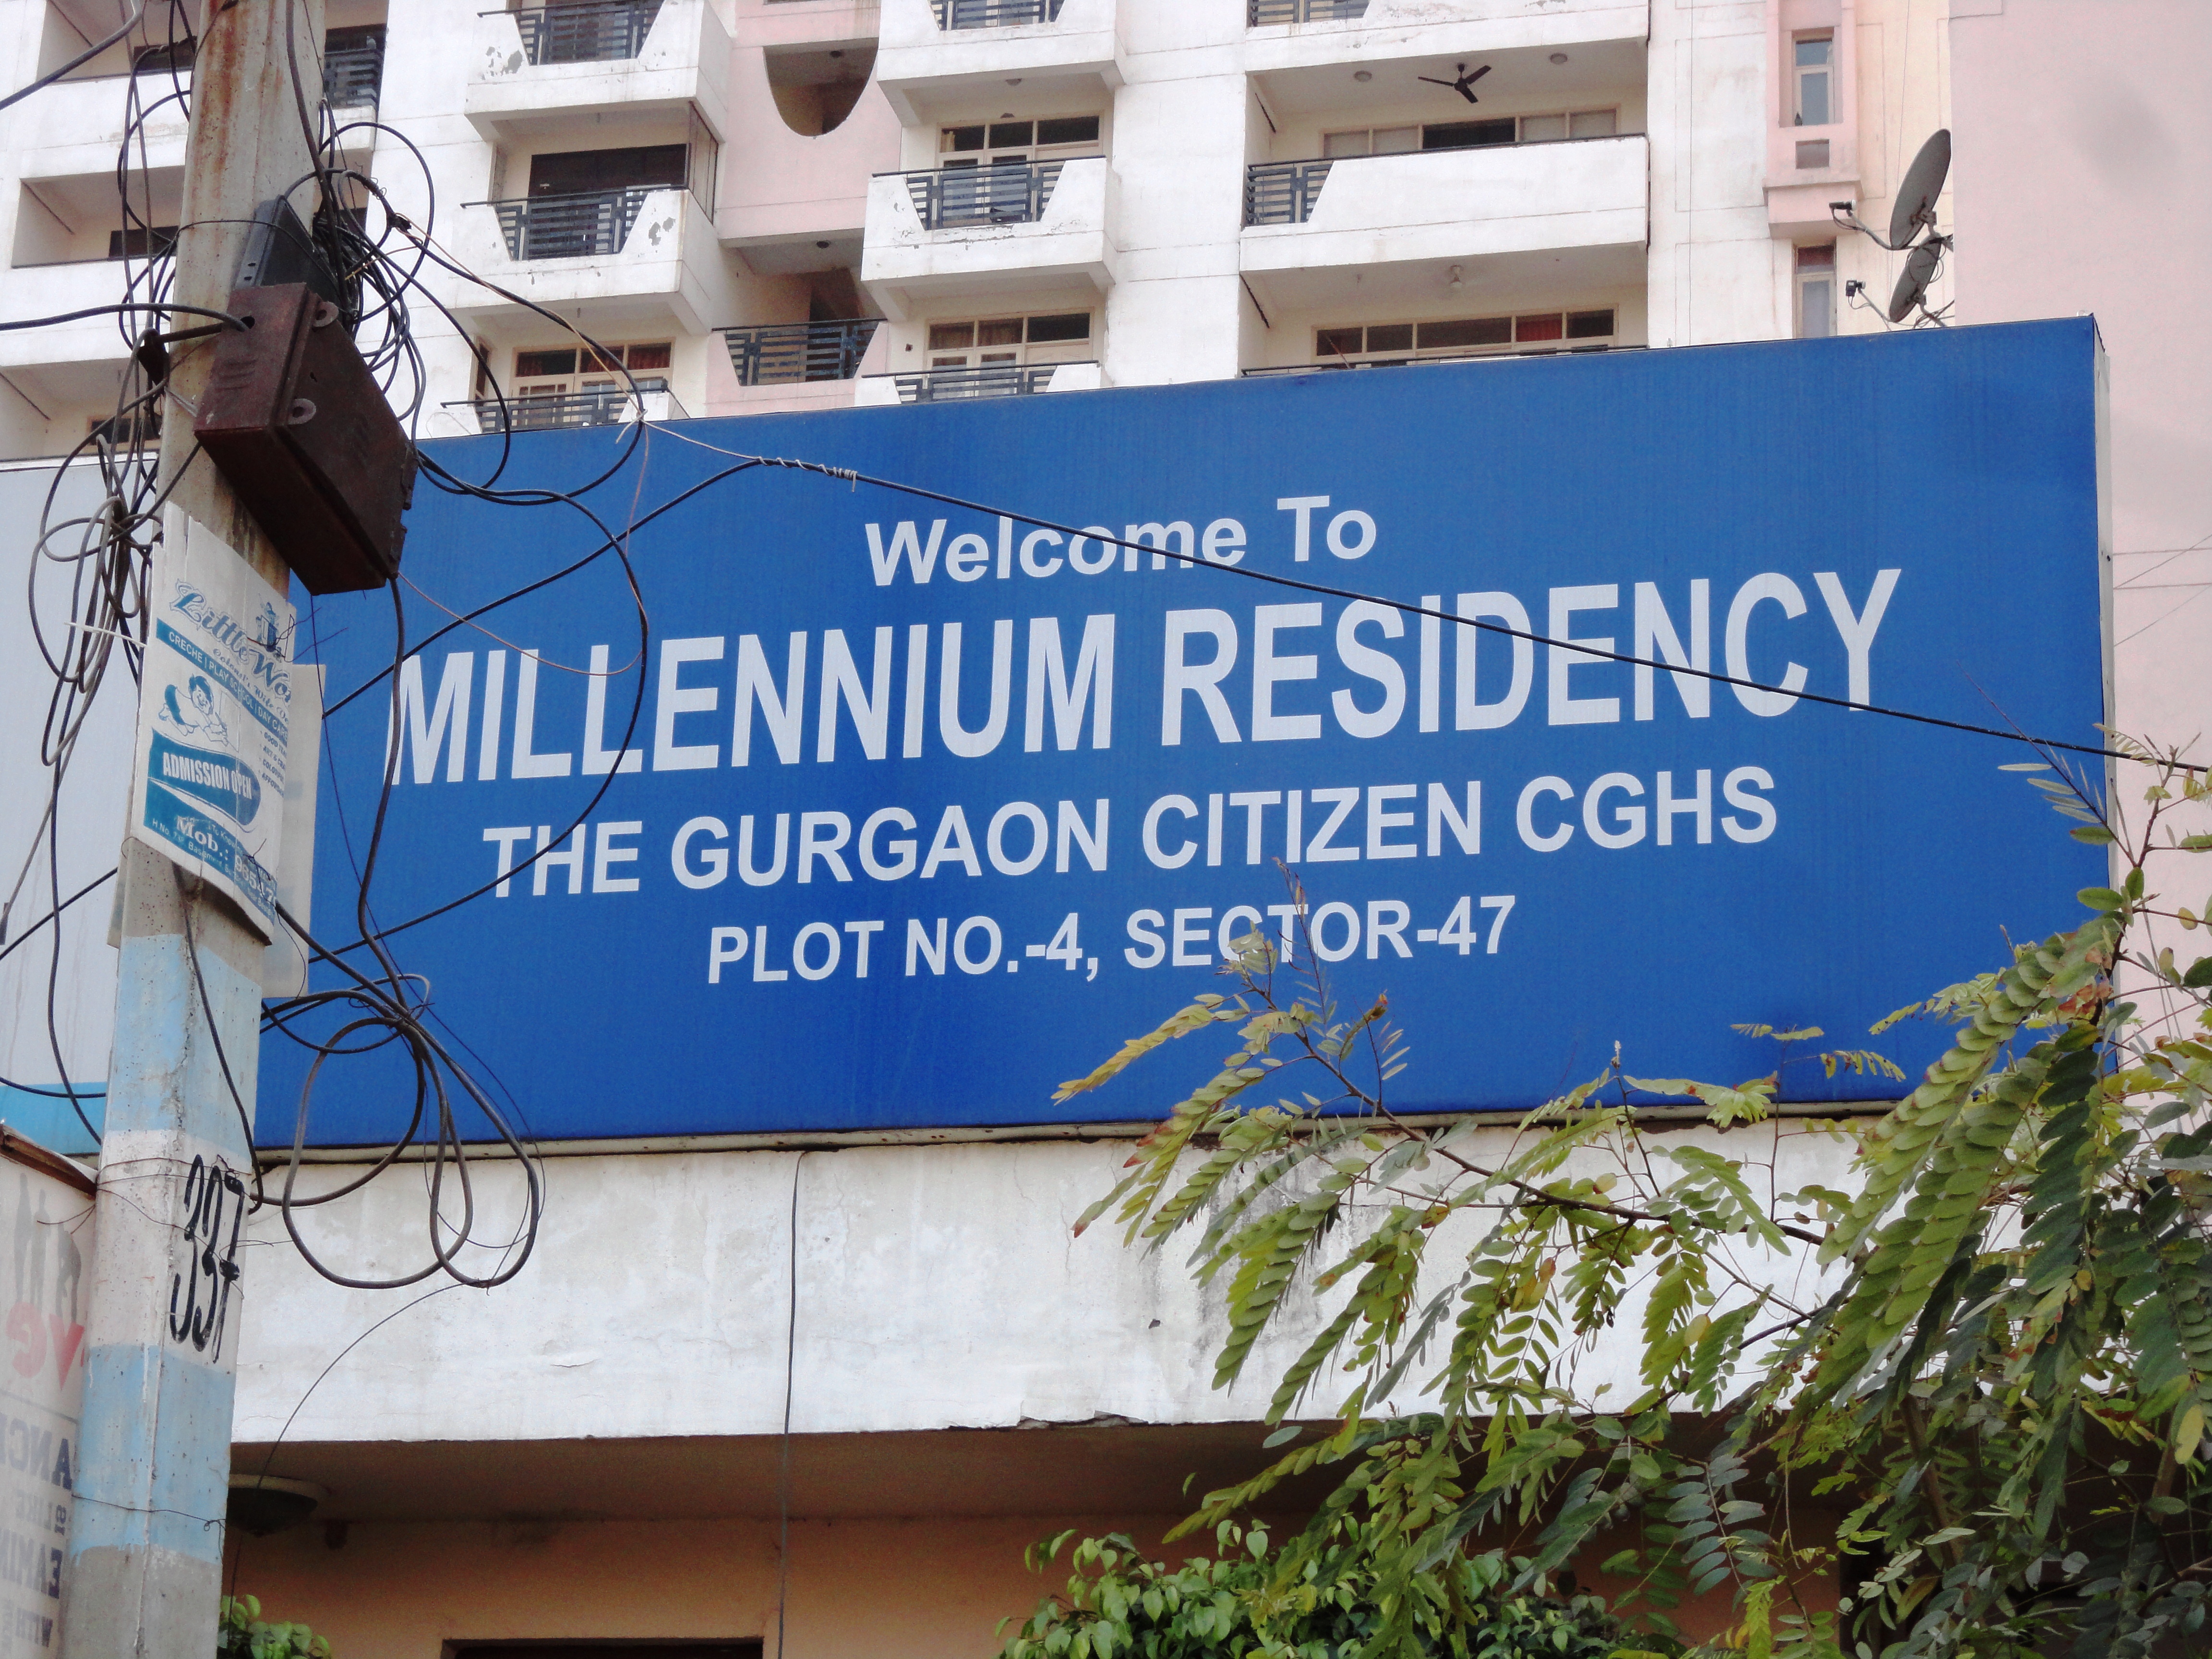 Millennium Residency CGHS Project Deails